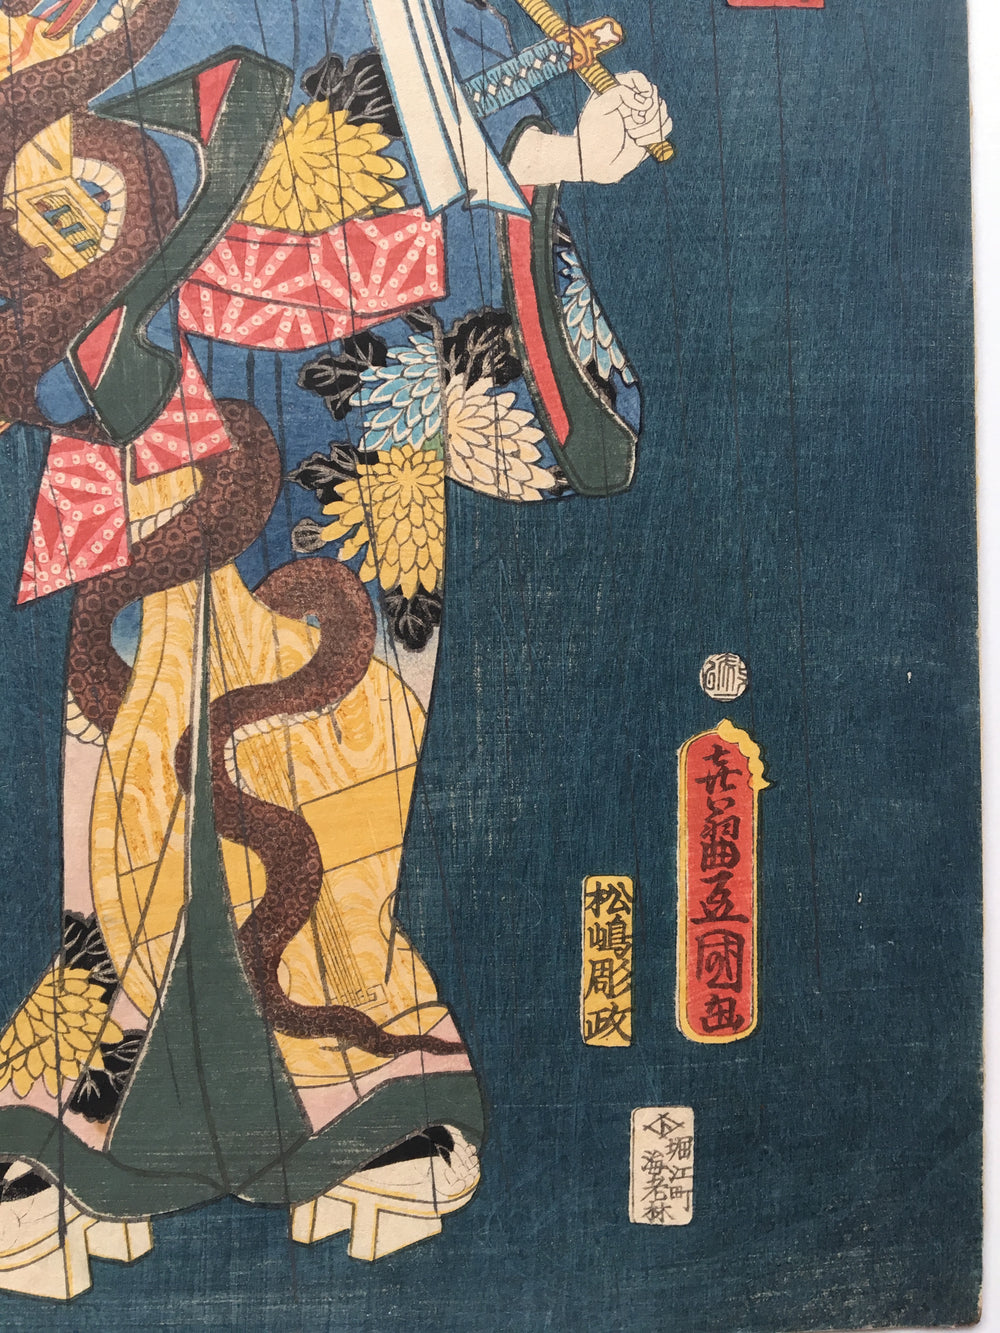 The Story of Aoto and the Gorgeous Woodblock Print (Toyokuni III, 1862)